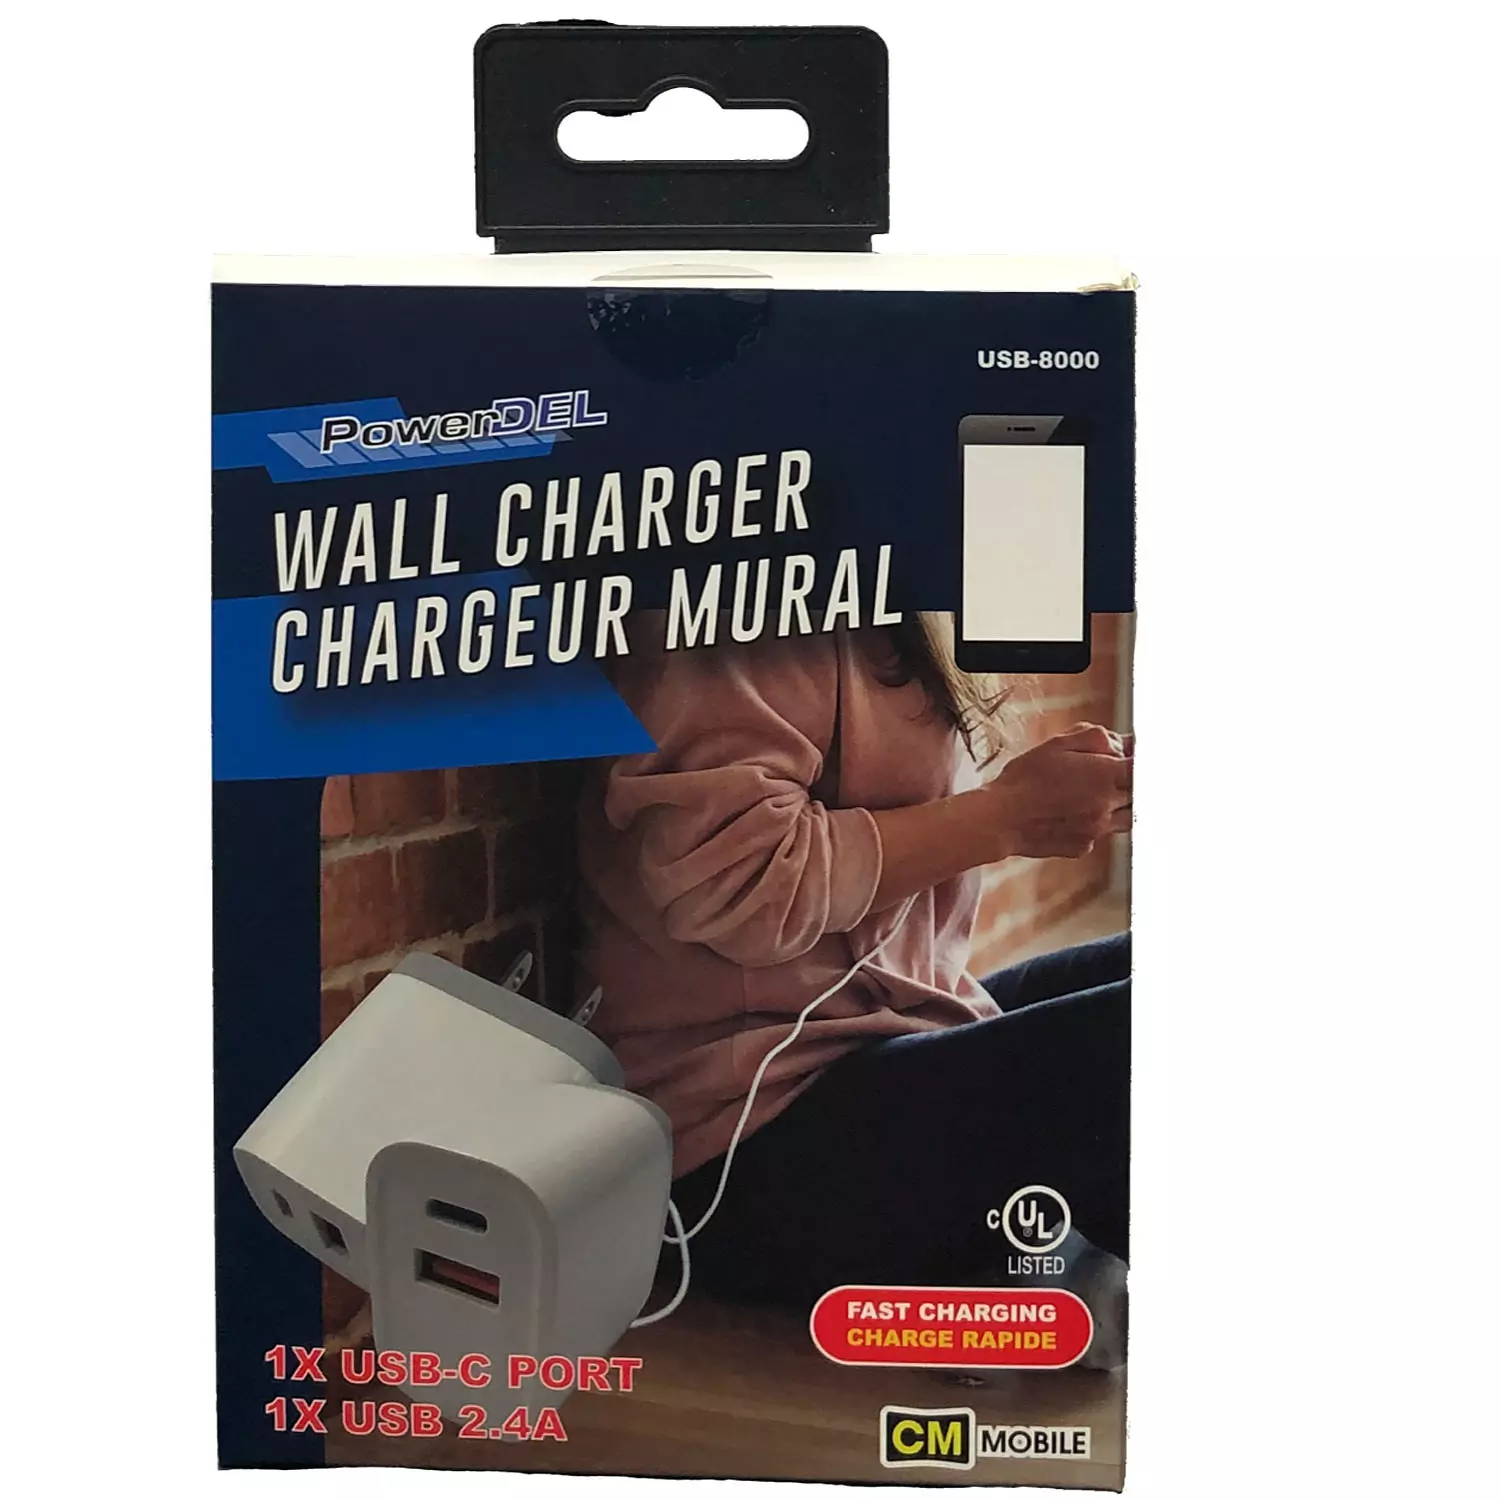 USB-C Chargeur Mural